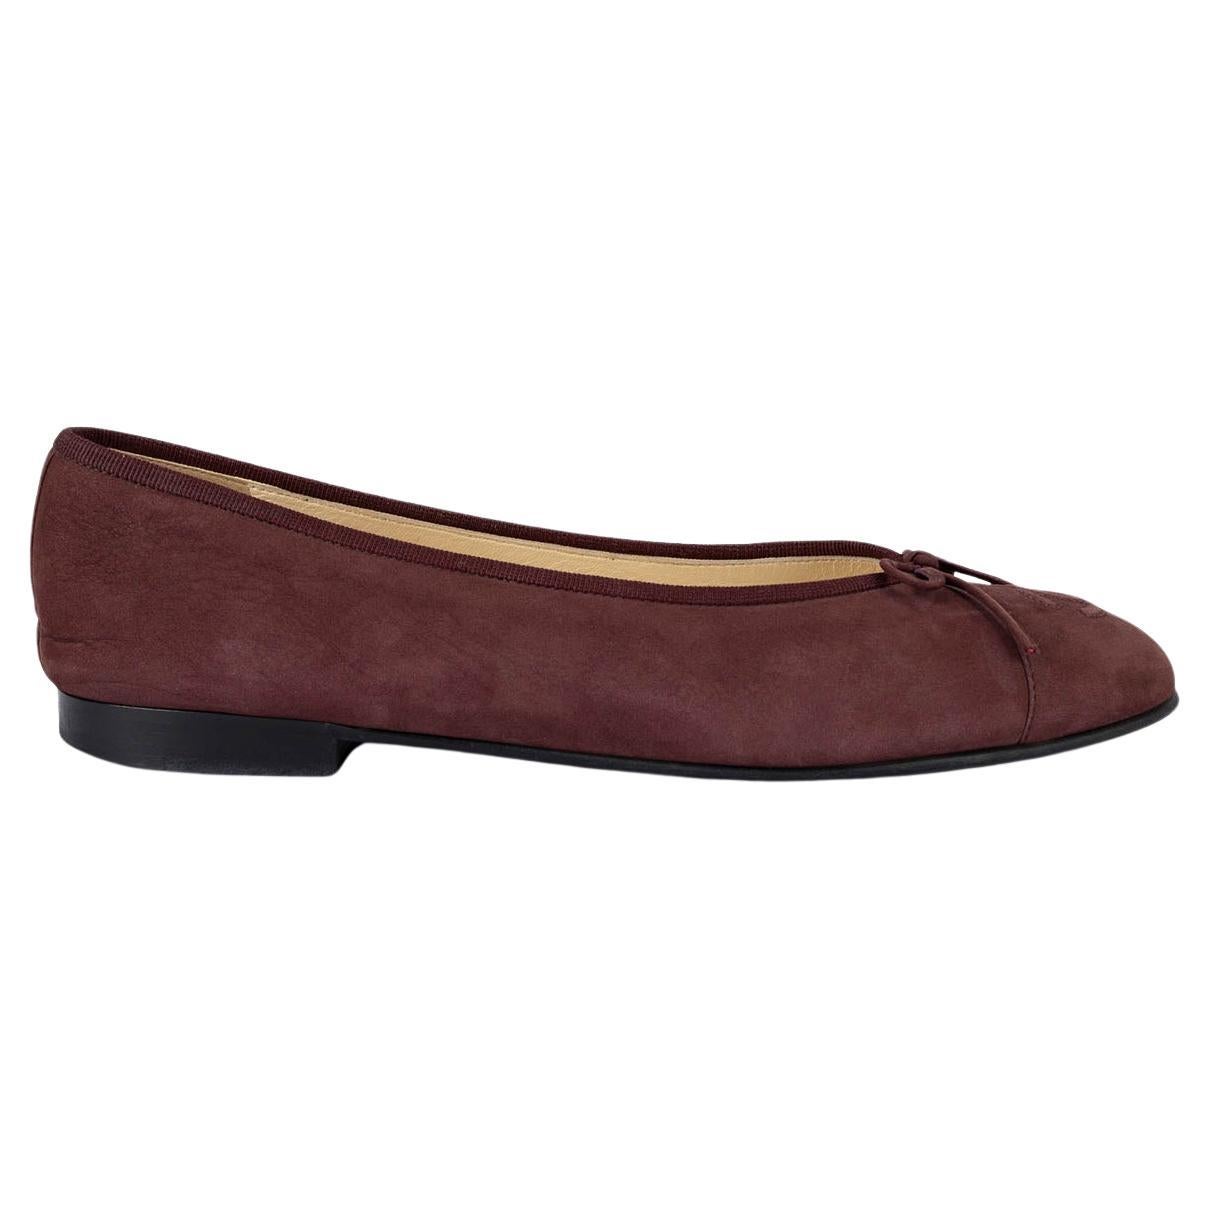 CHANEL burgundy suede CLASSIC Ballet Flats Shoes 39.5 fit 39 For Sale